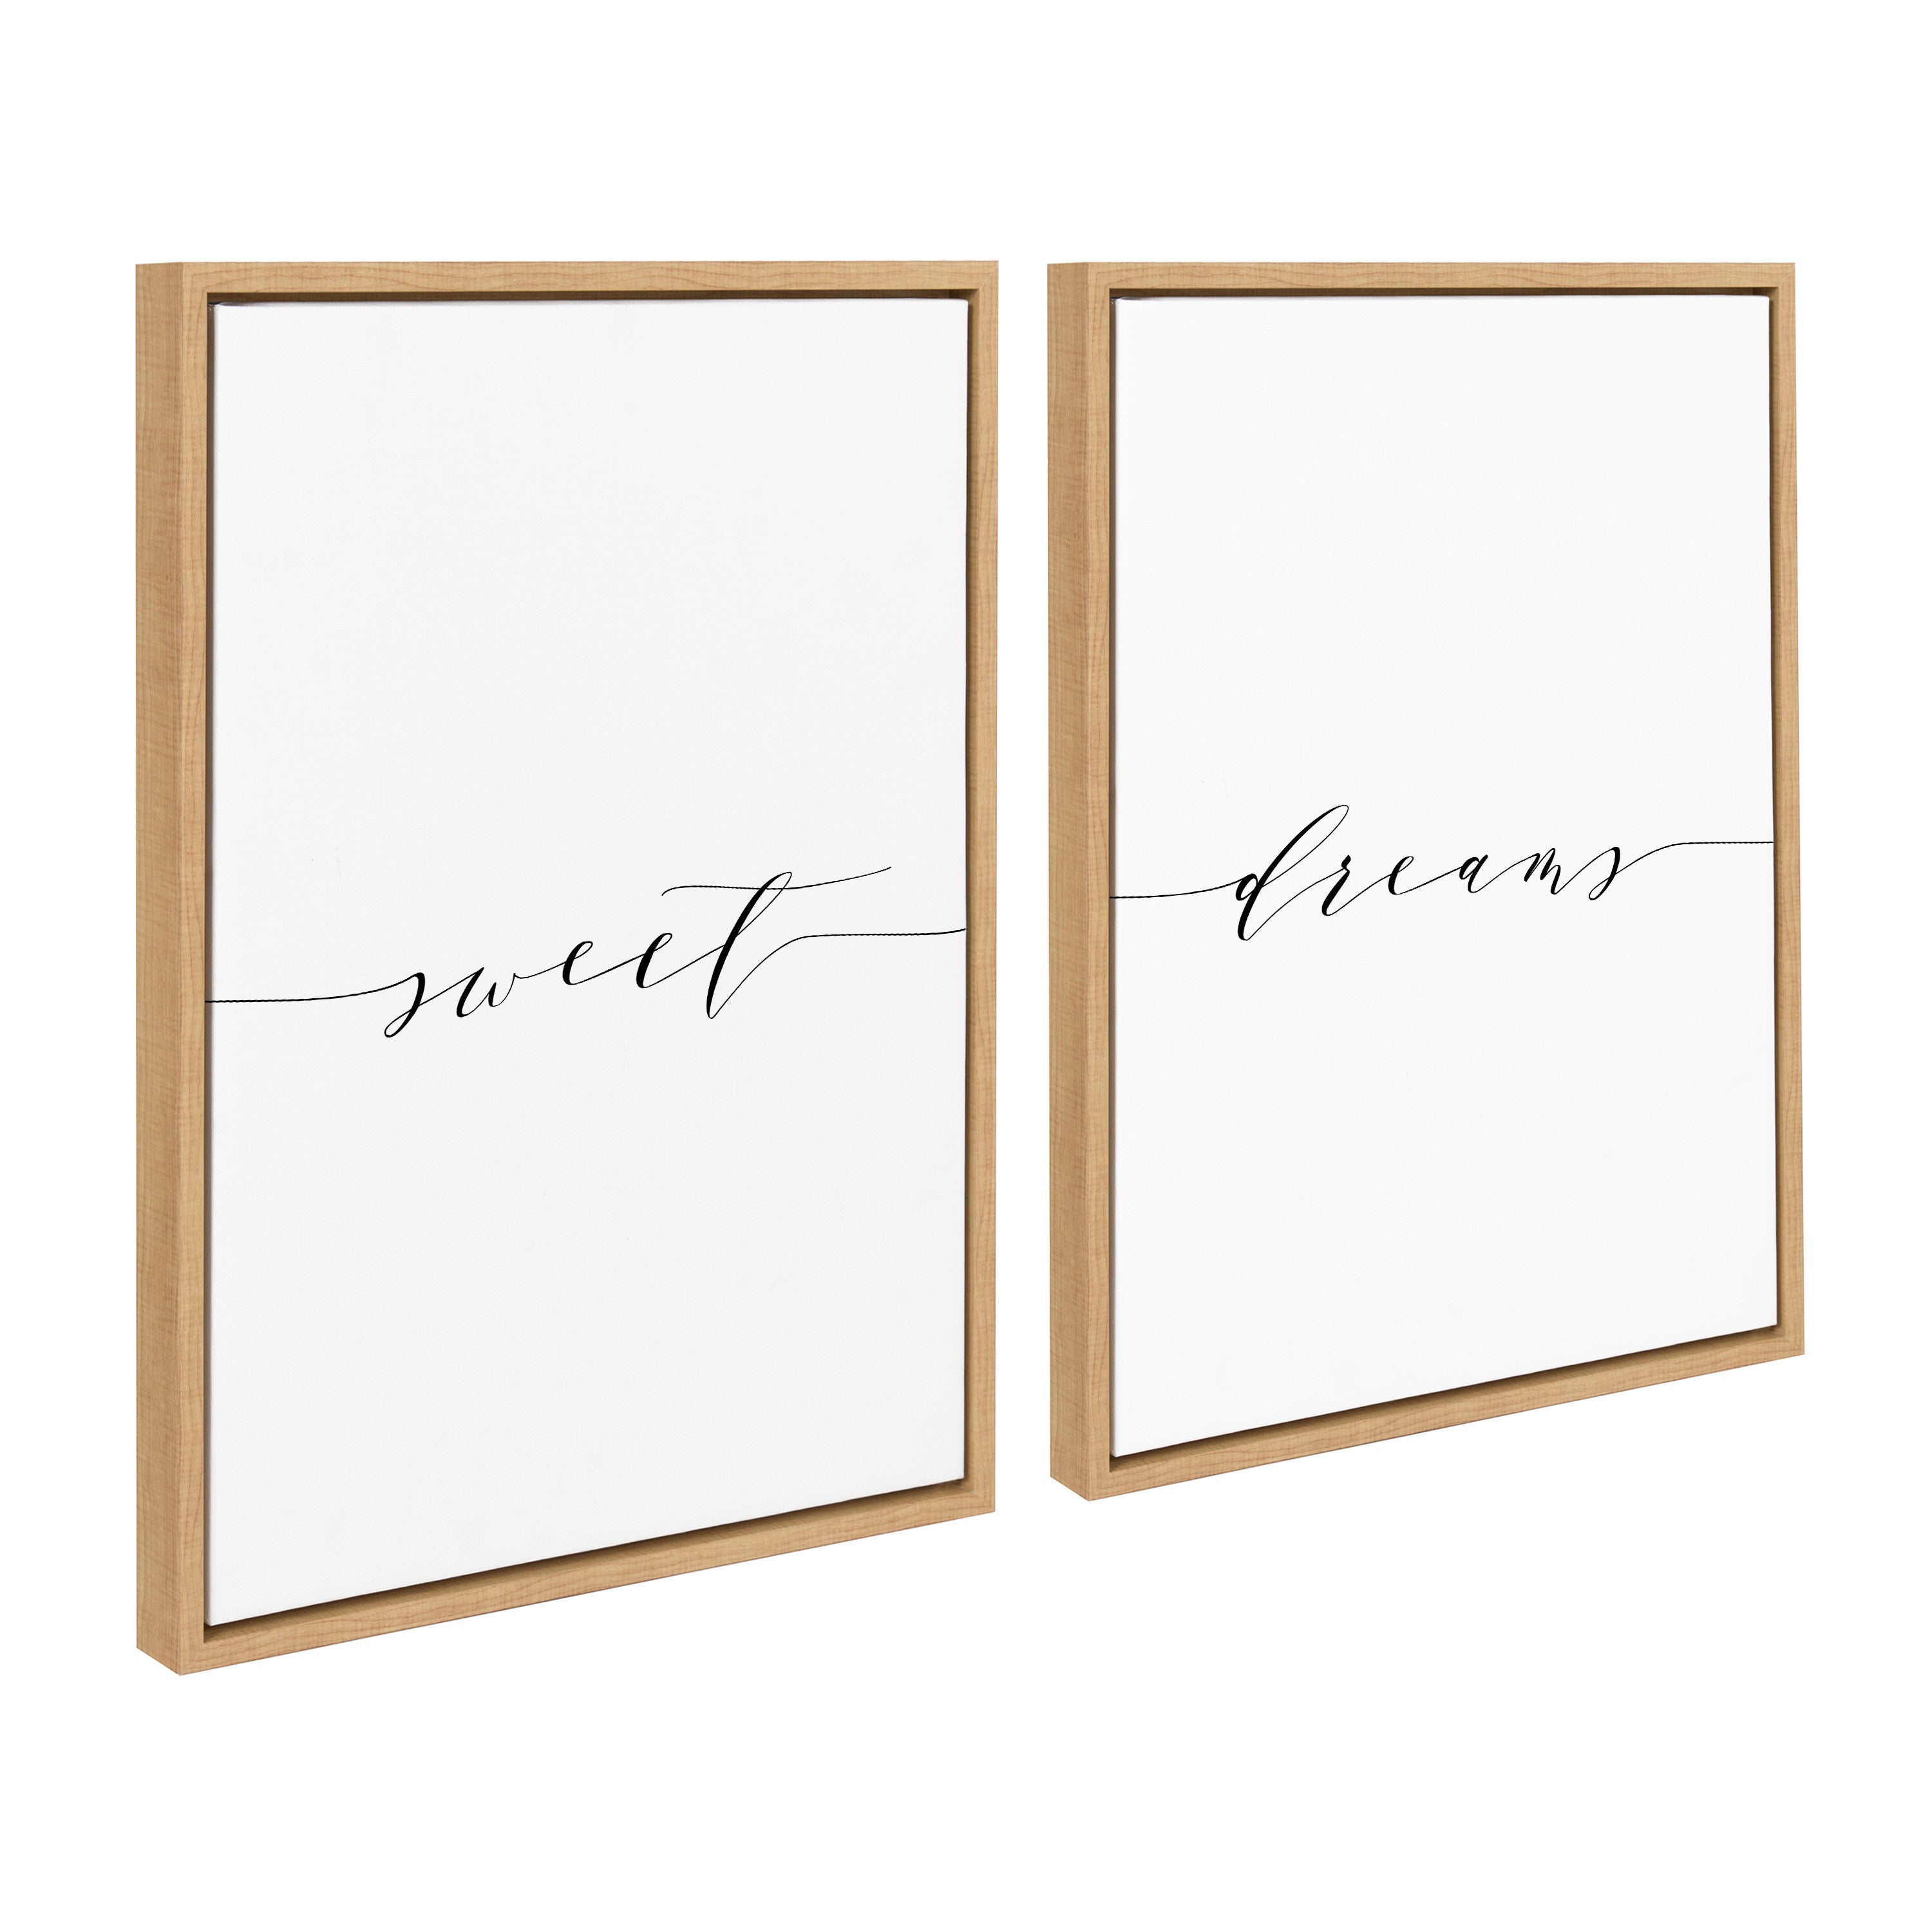 Sylvie Sweet Dreams Framed Canvas Art Set by Maggie Price of Hunt and Gather Goods